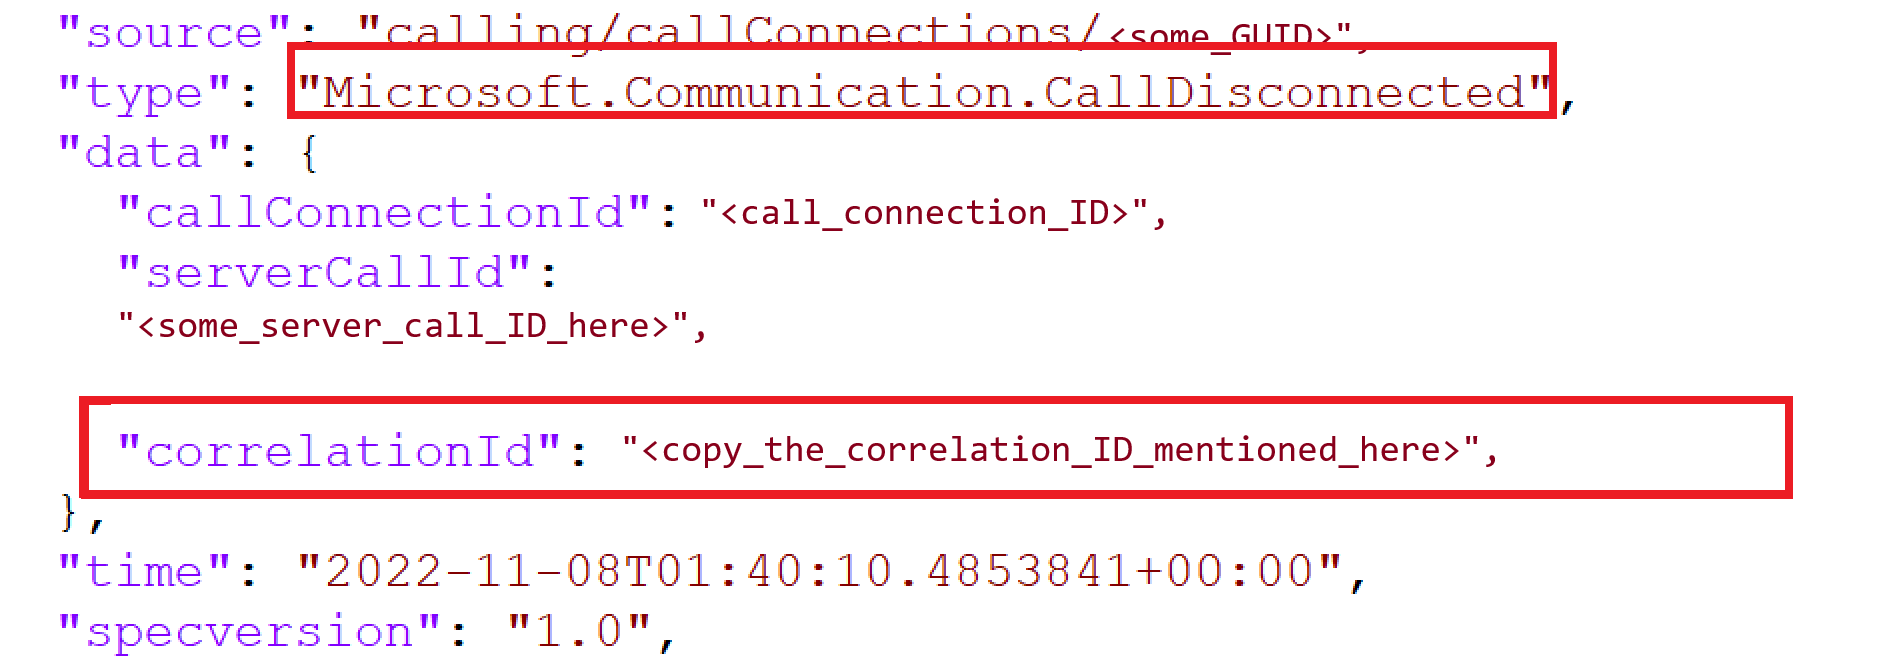 Screenshot of call disconnected event showing correlation ID.